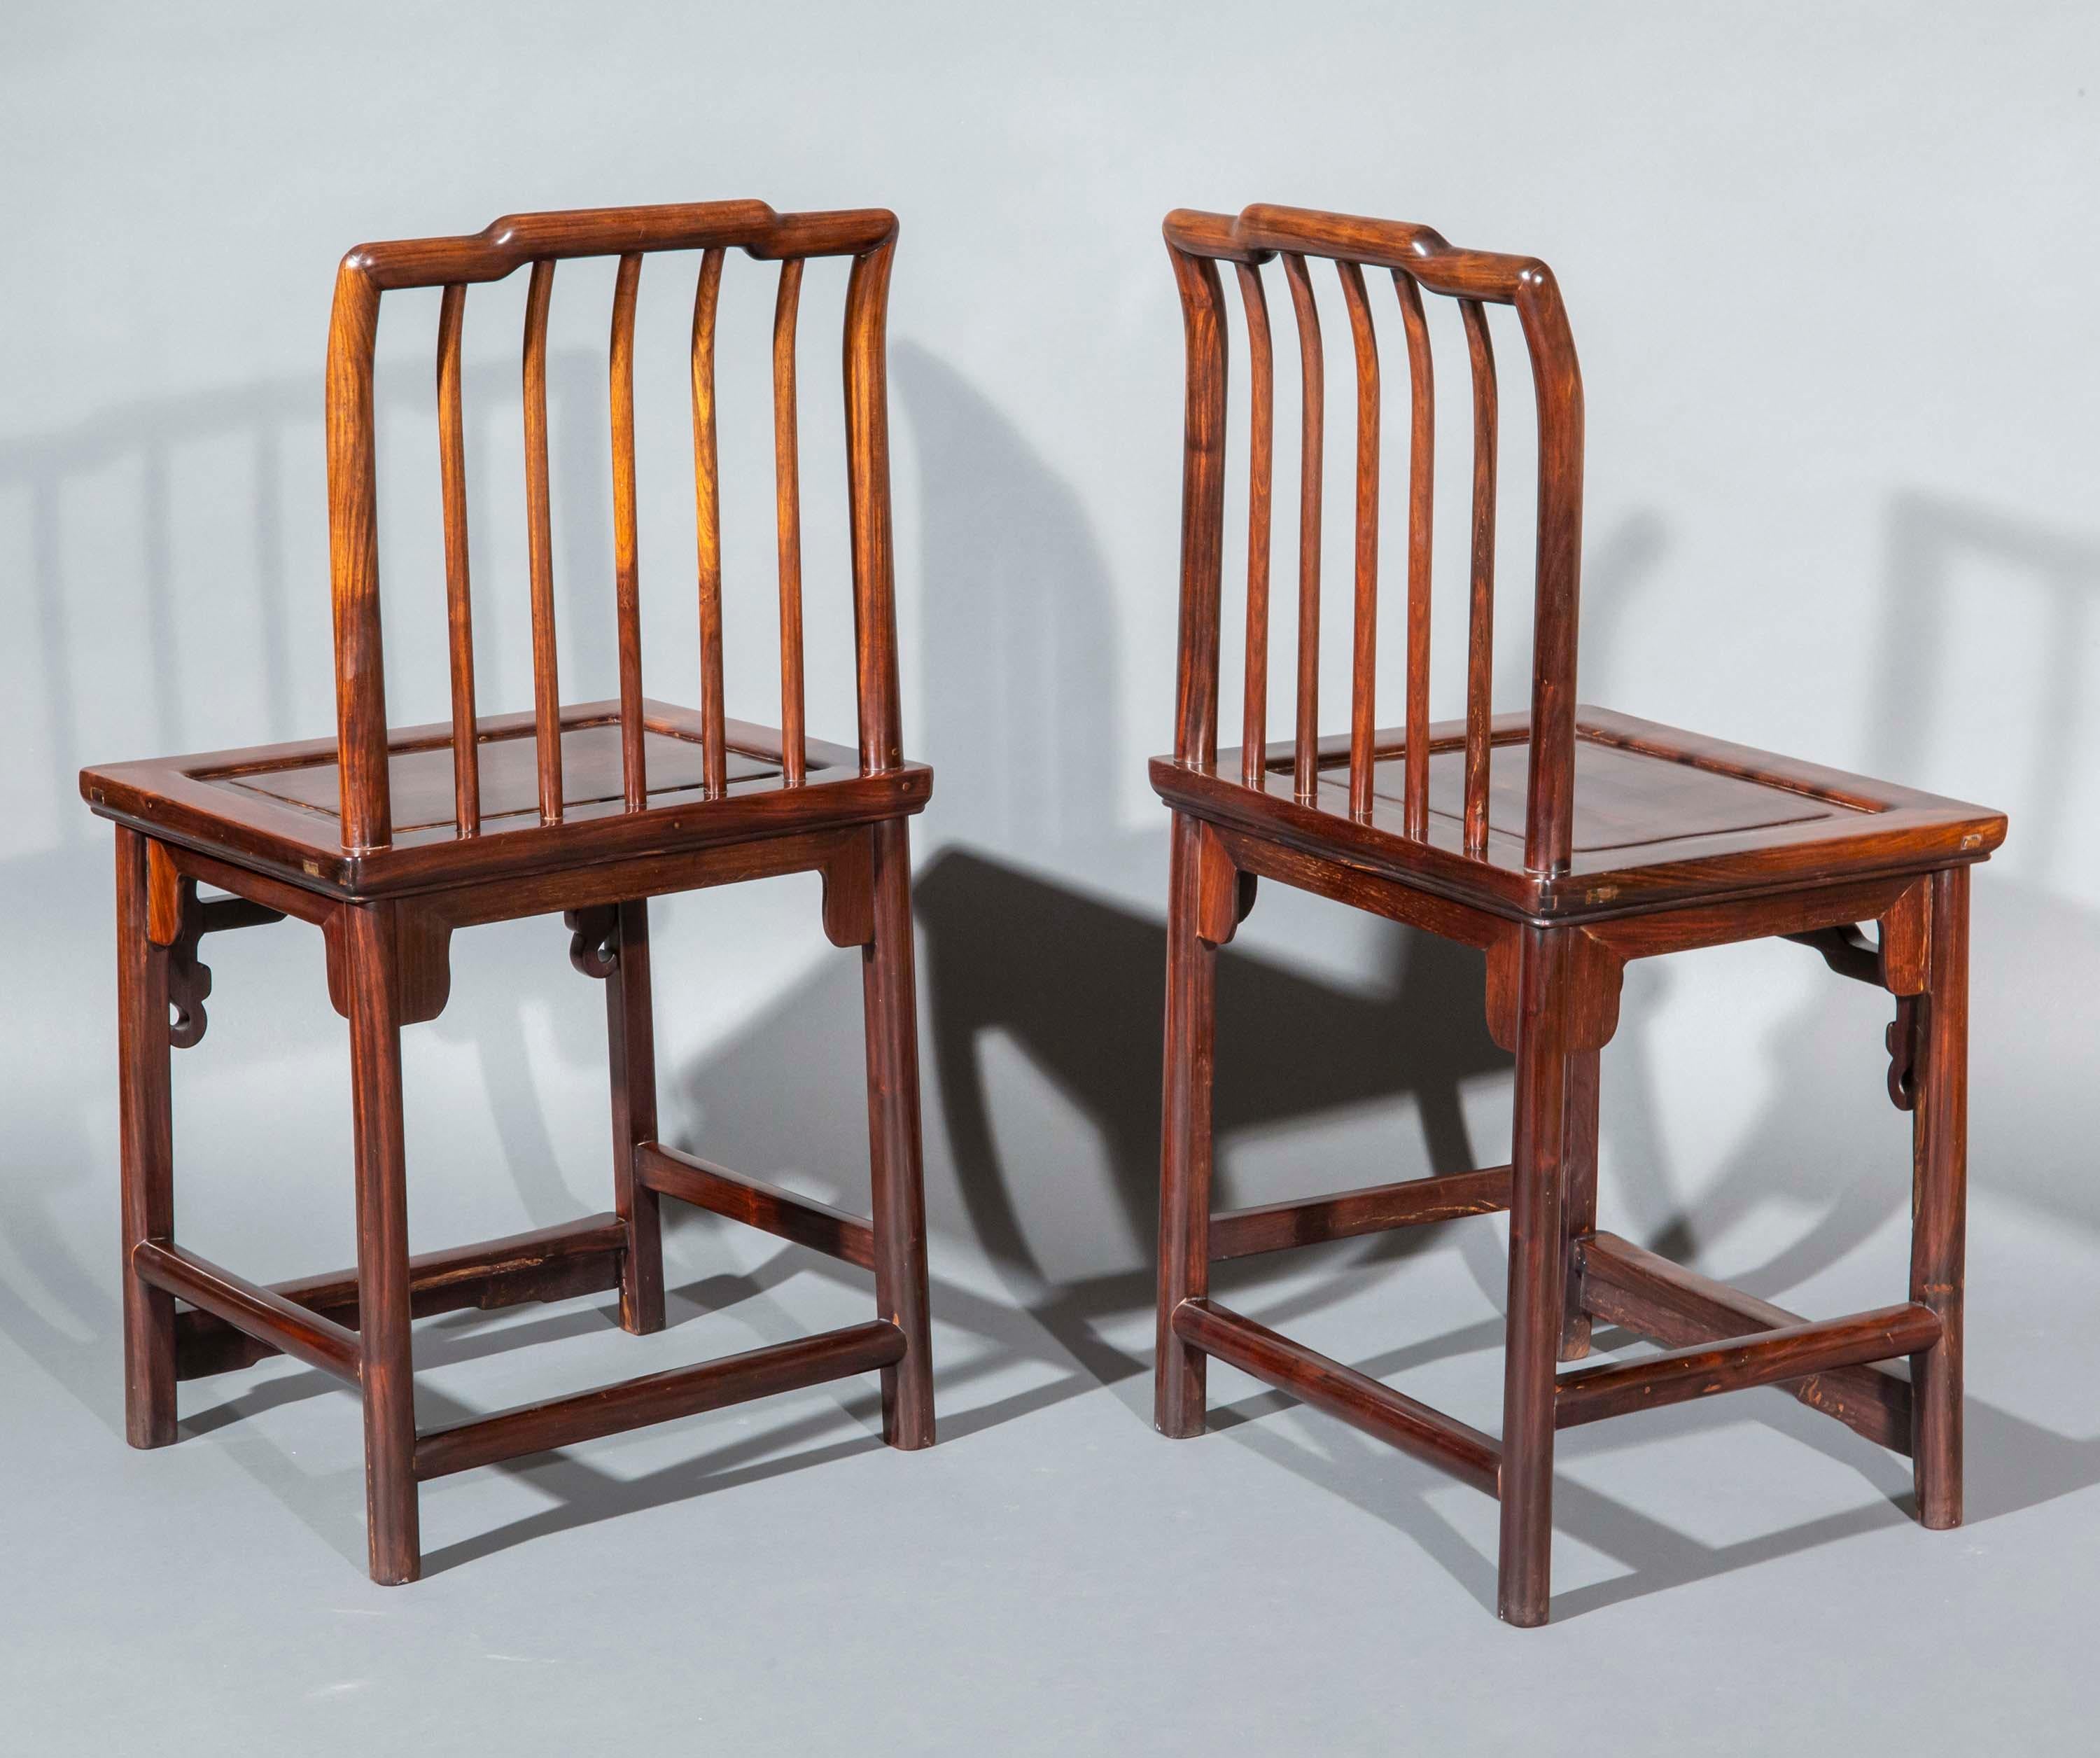 A stunning pair of Chinese Ming style side chairs or meiguiyi, with spindle-backs and solid seats.
China, Qing dynasty, circa 1800–1900.

Why we like them
Their smart design, superb quality and richly patinated, original colour make these chairs a